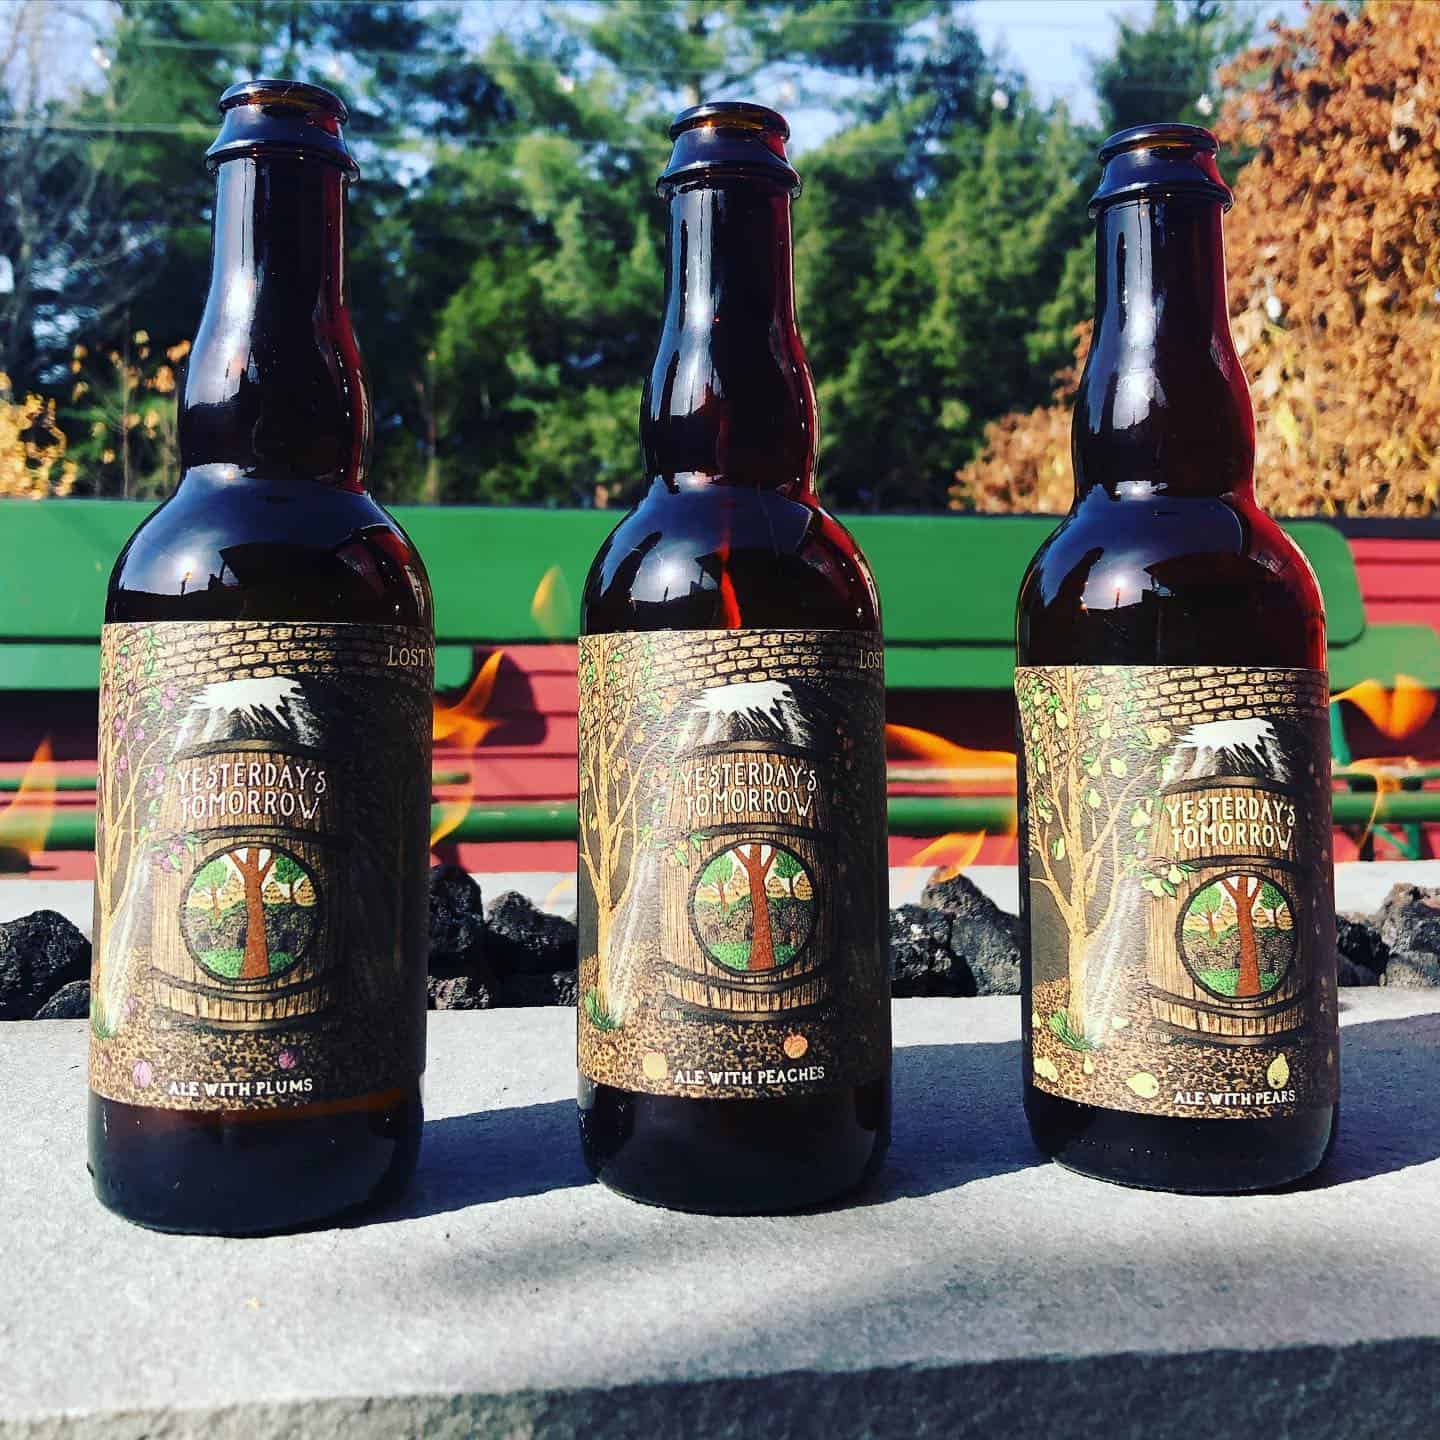 Lost Nation Brewing - Yesterday's Tomorrow Bottles